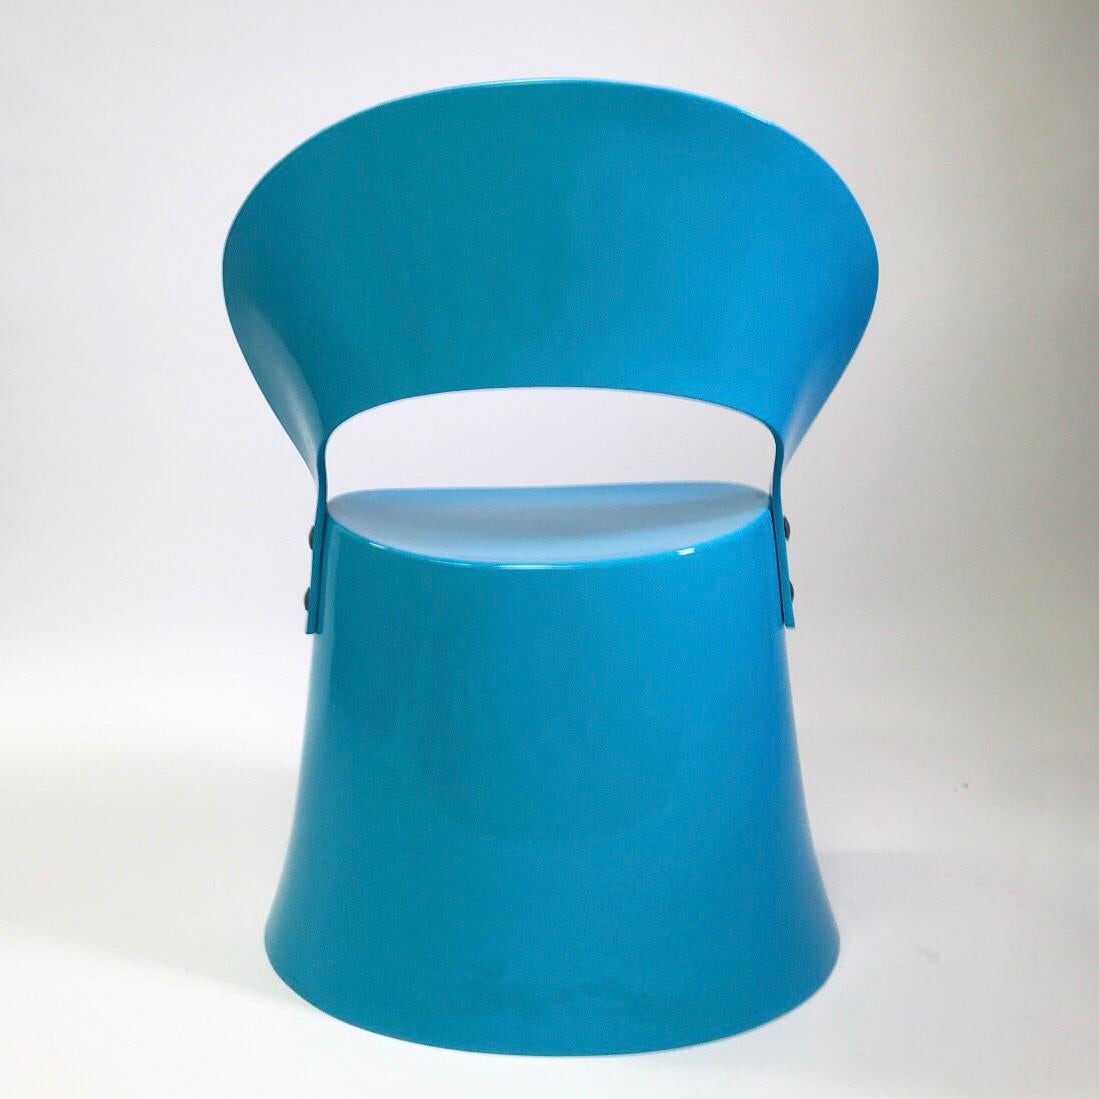 Playful, Space Age and super rare collectors piece by Nanna Ditzel for OD Møbler / Domus Danica 1969. 

Light high glossy blue fibre glass designed chair for use indoor or outdoor. 

Mint condition without any signs of usage. 

Size: seat height